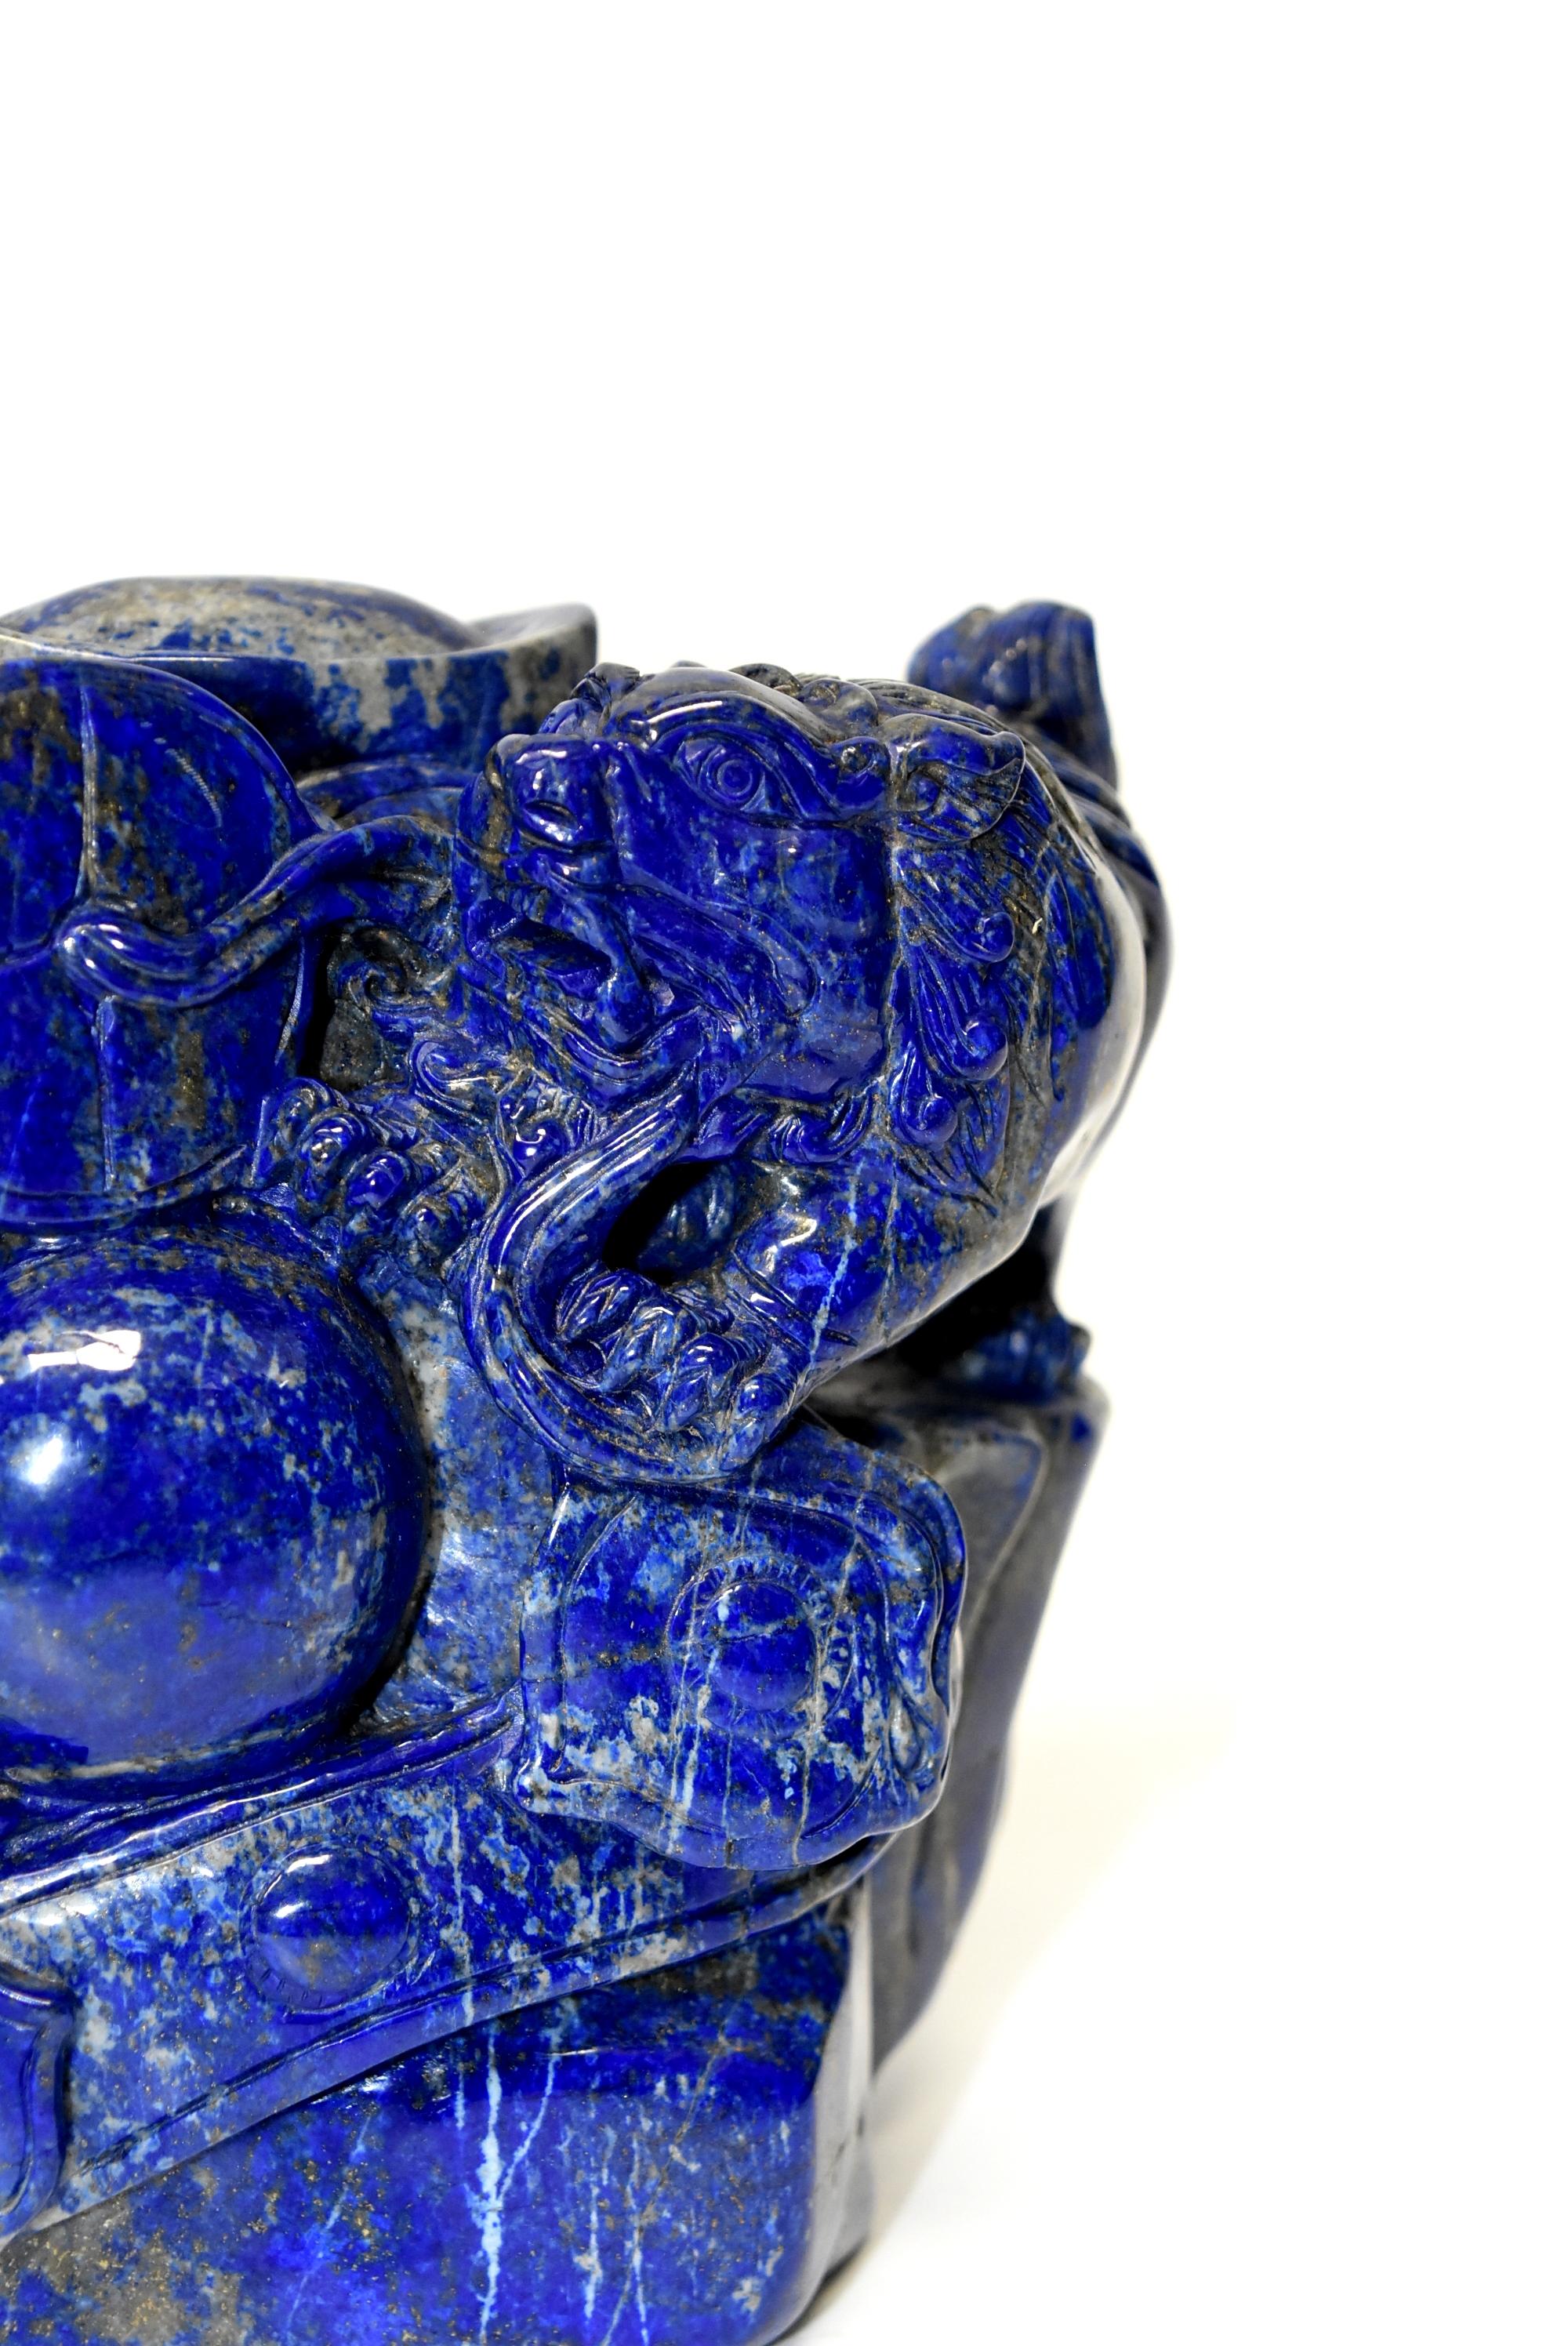 Afghan Natural Lapis Lazuli 8 lb Block with Carved Lions